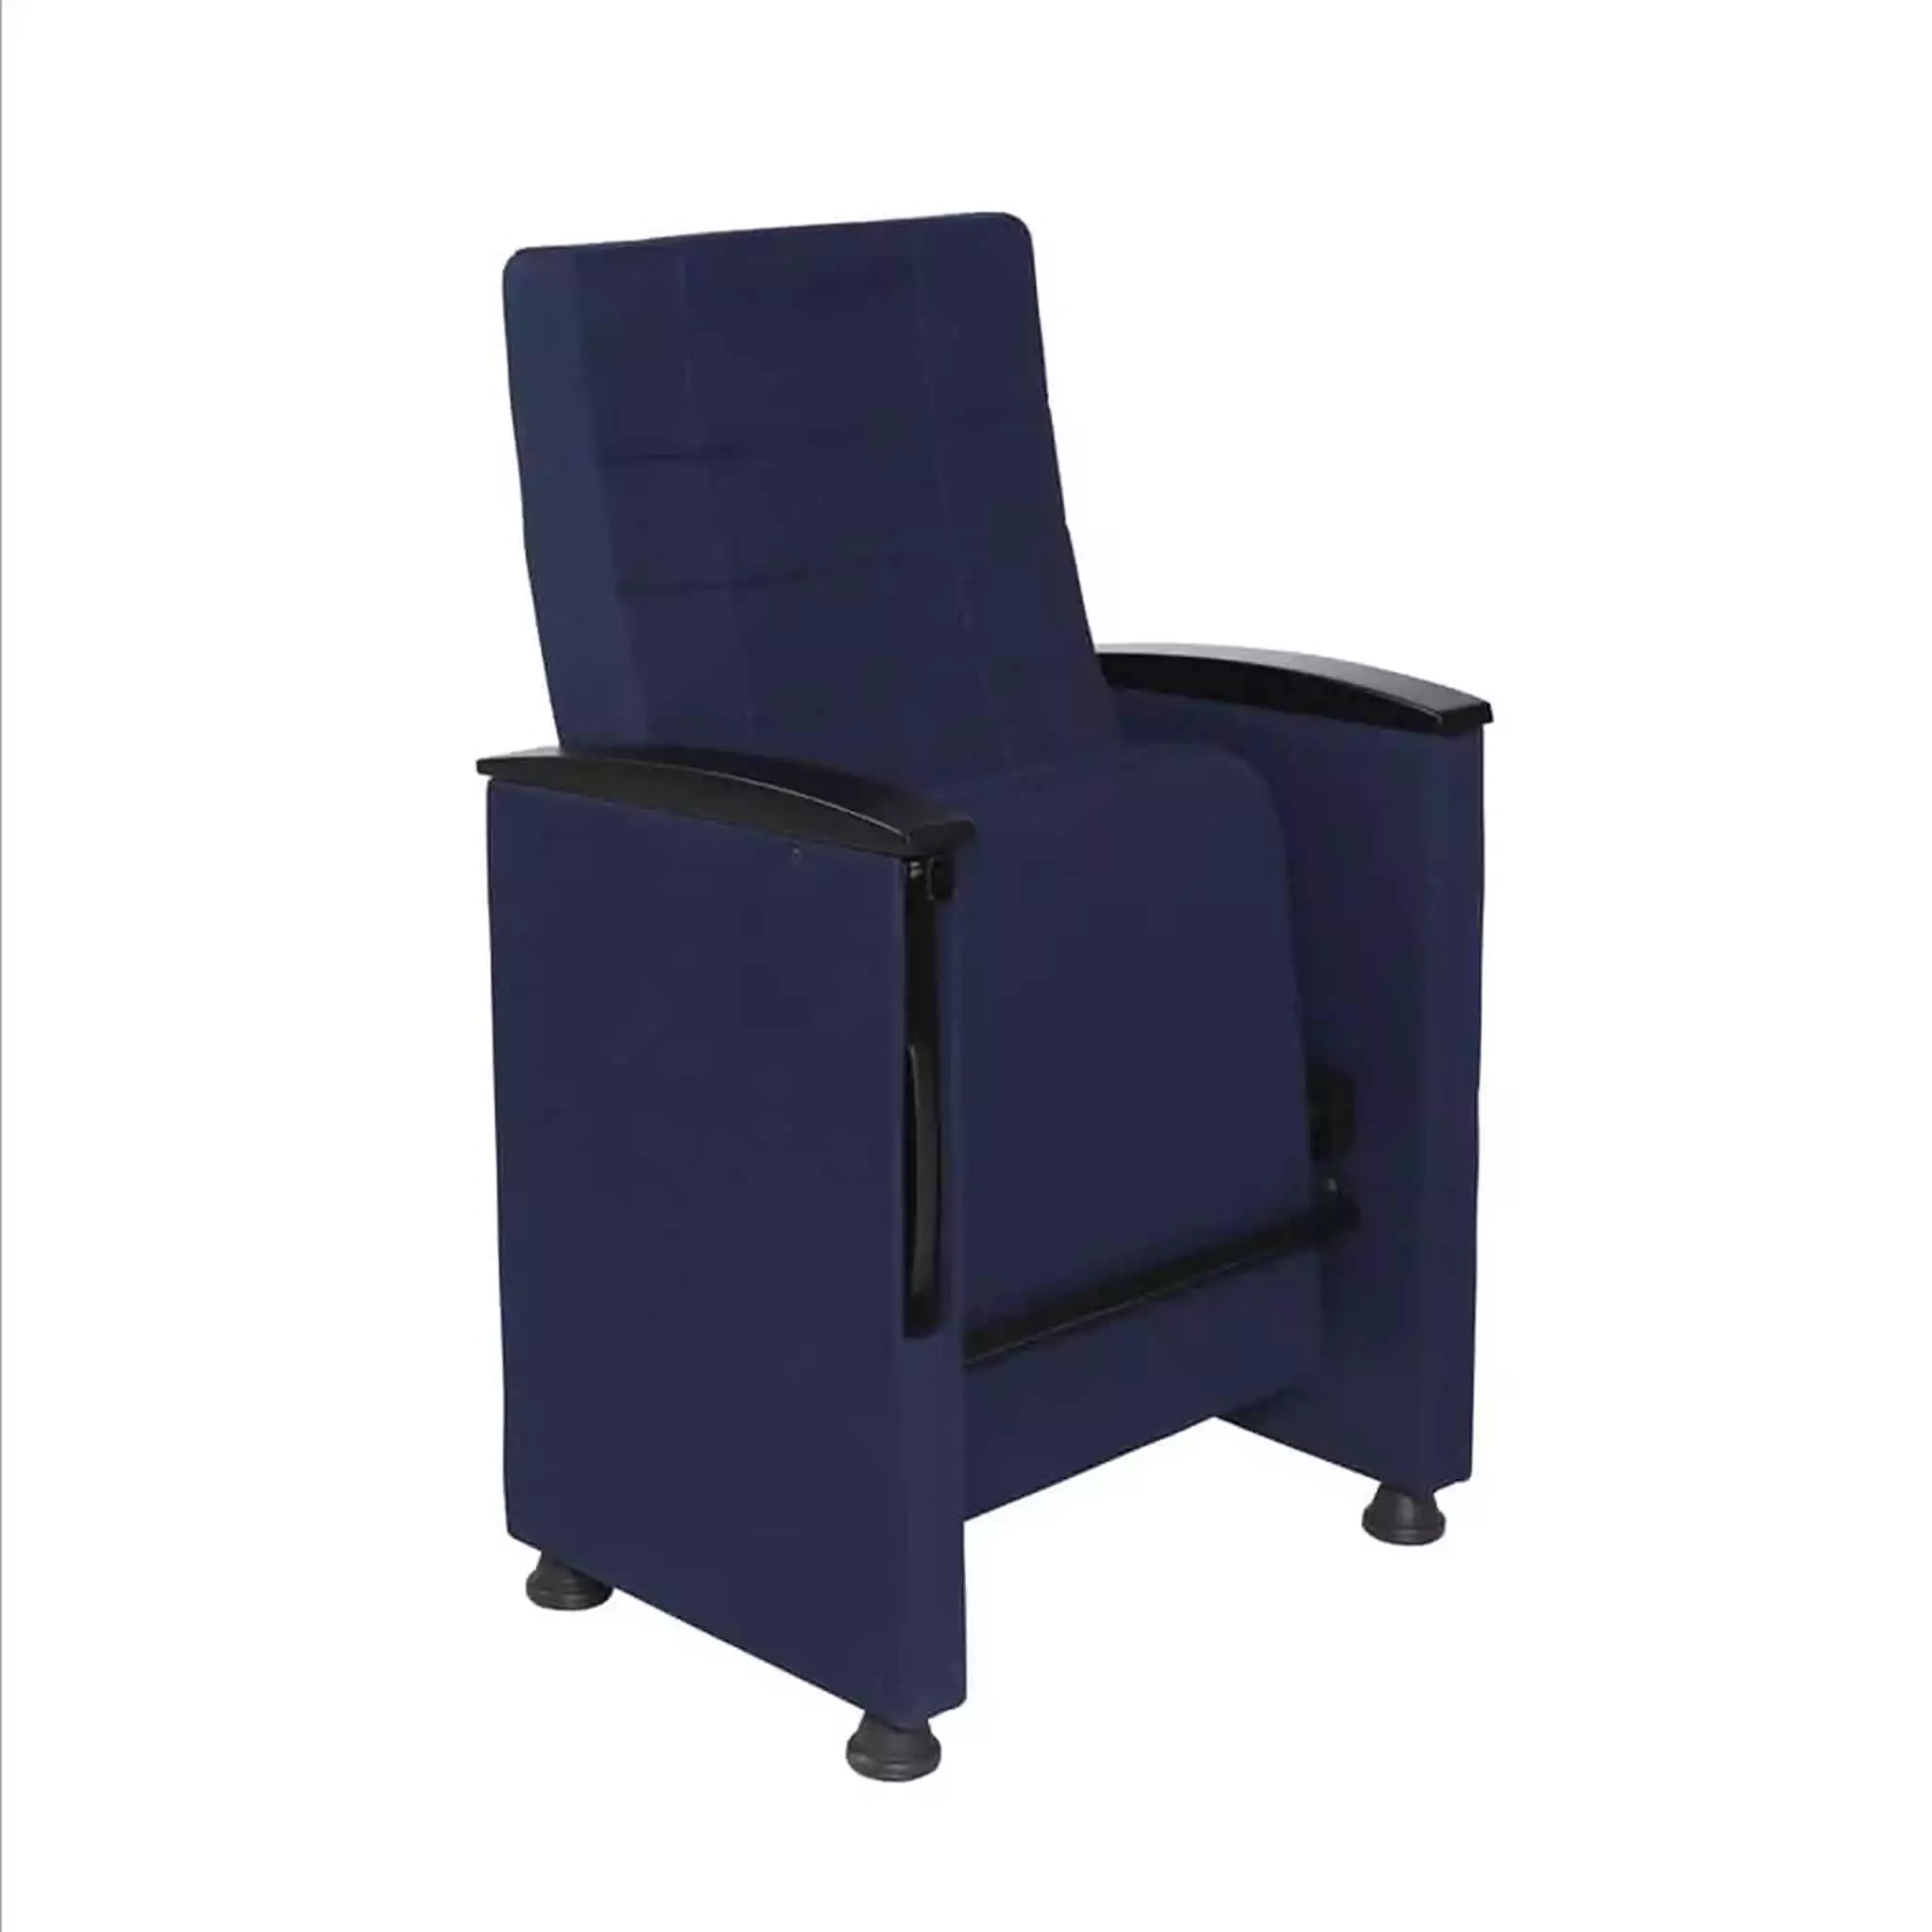 Simko Seating Product Conference Seat Safir AP Movable